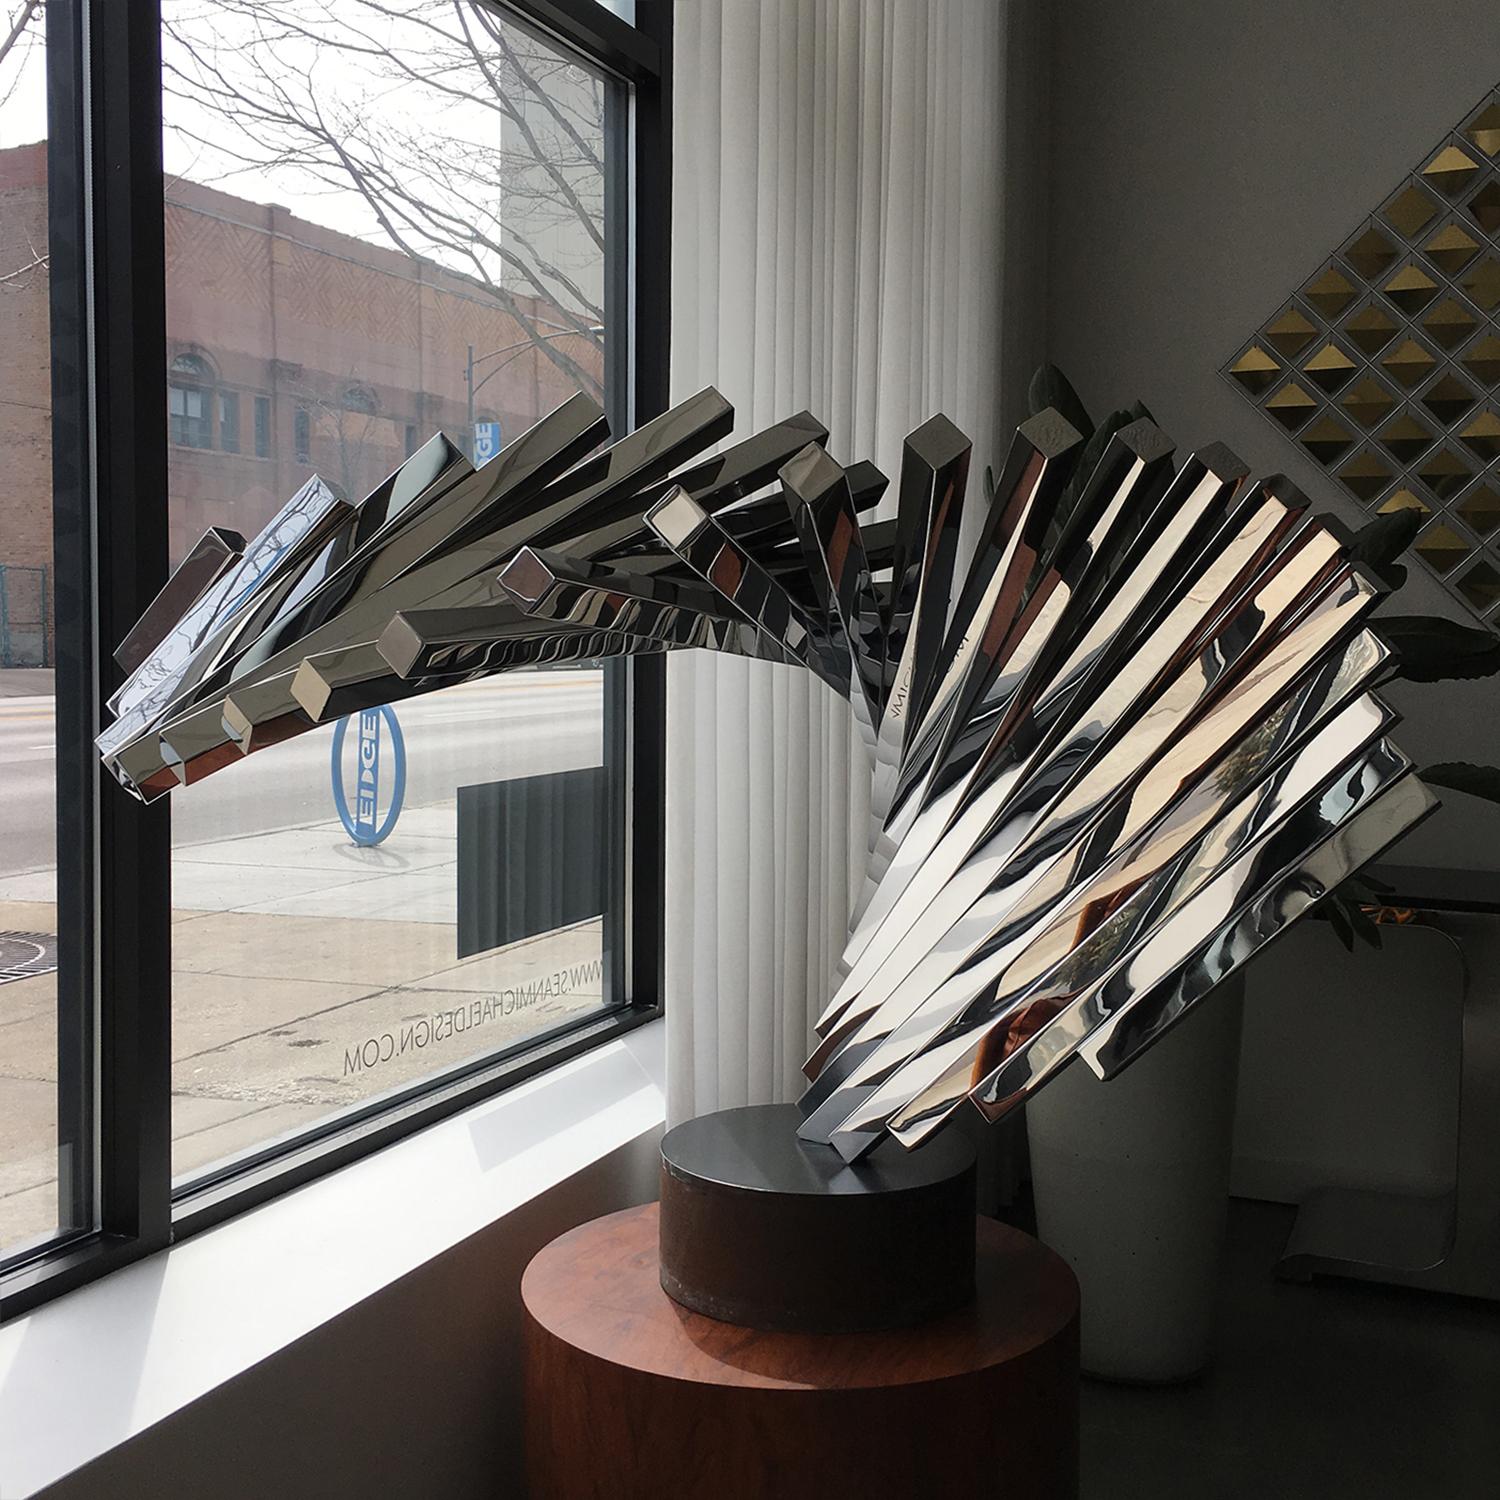 David Lee Brown Abstract Stainless Steel Sculpture for United Airlines 5